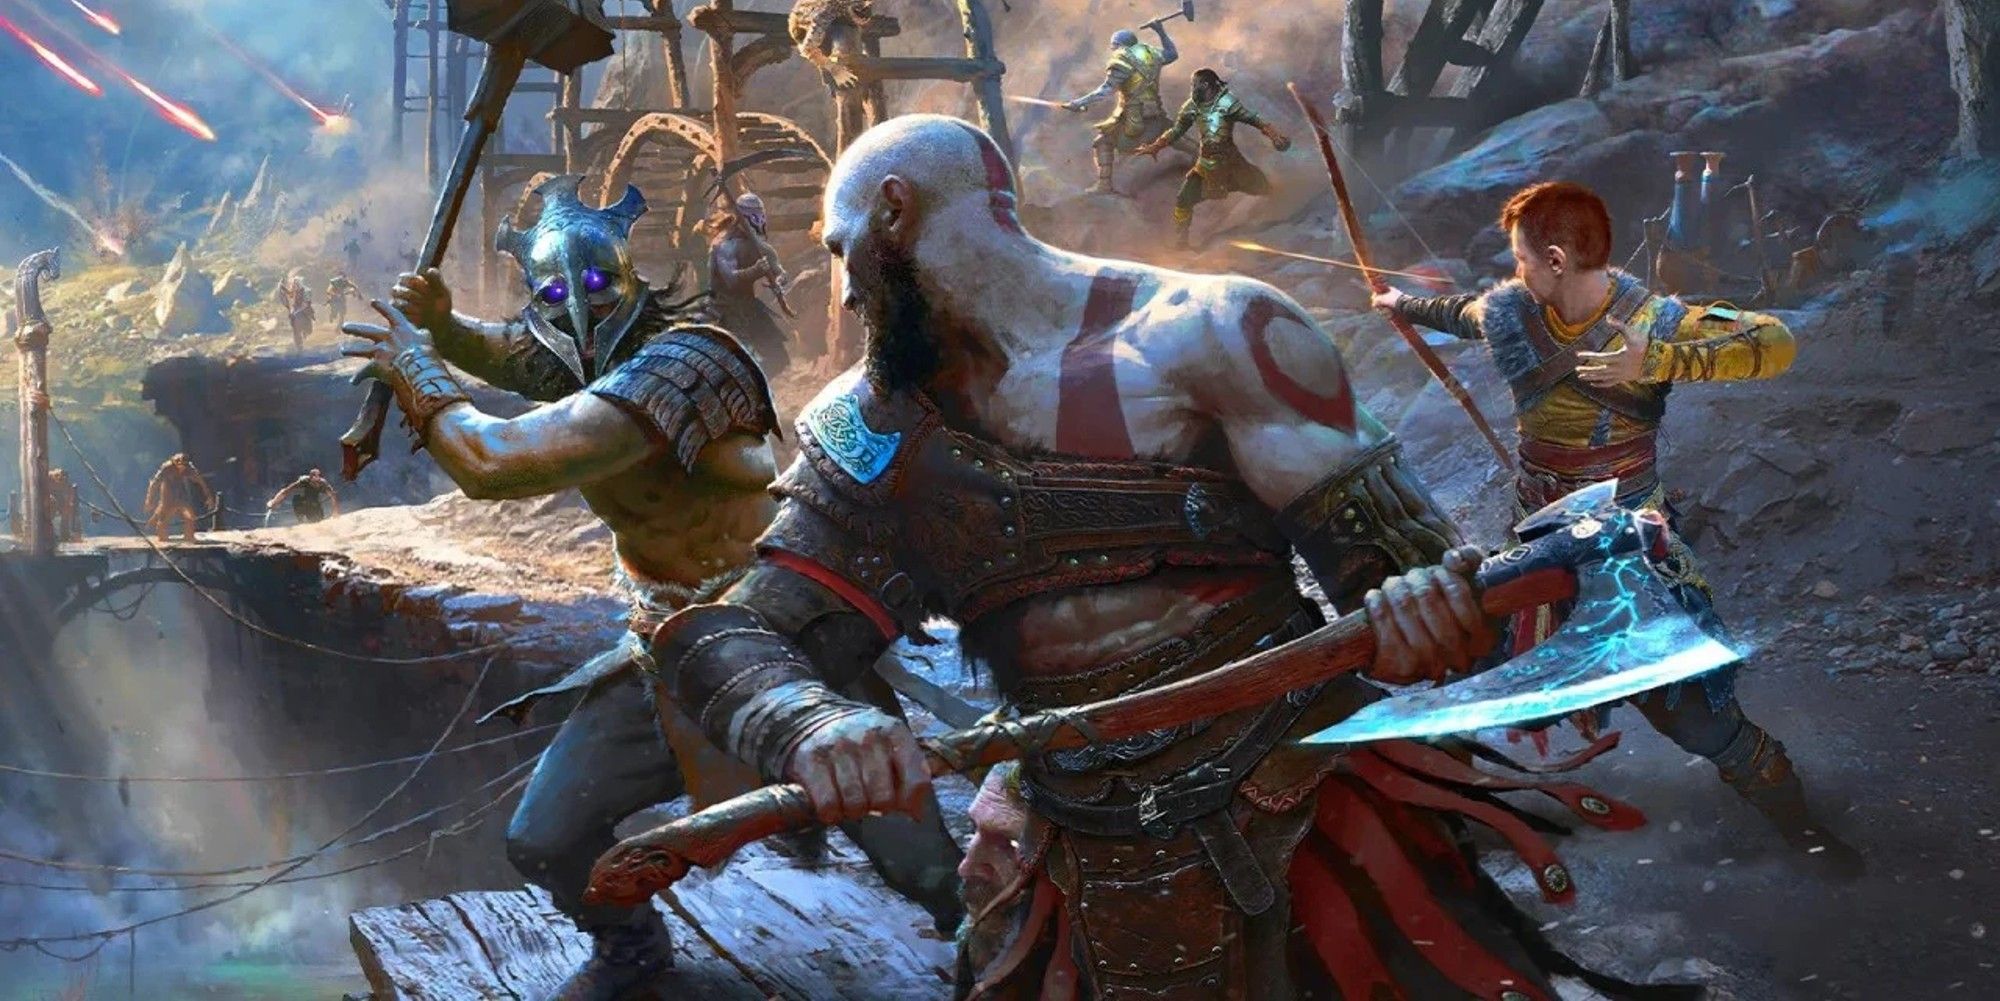 God of War' Is a Messy, Beguiling Take on Fantasy Violence and Toxic  Masculinity